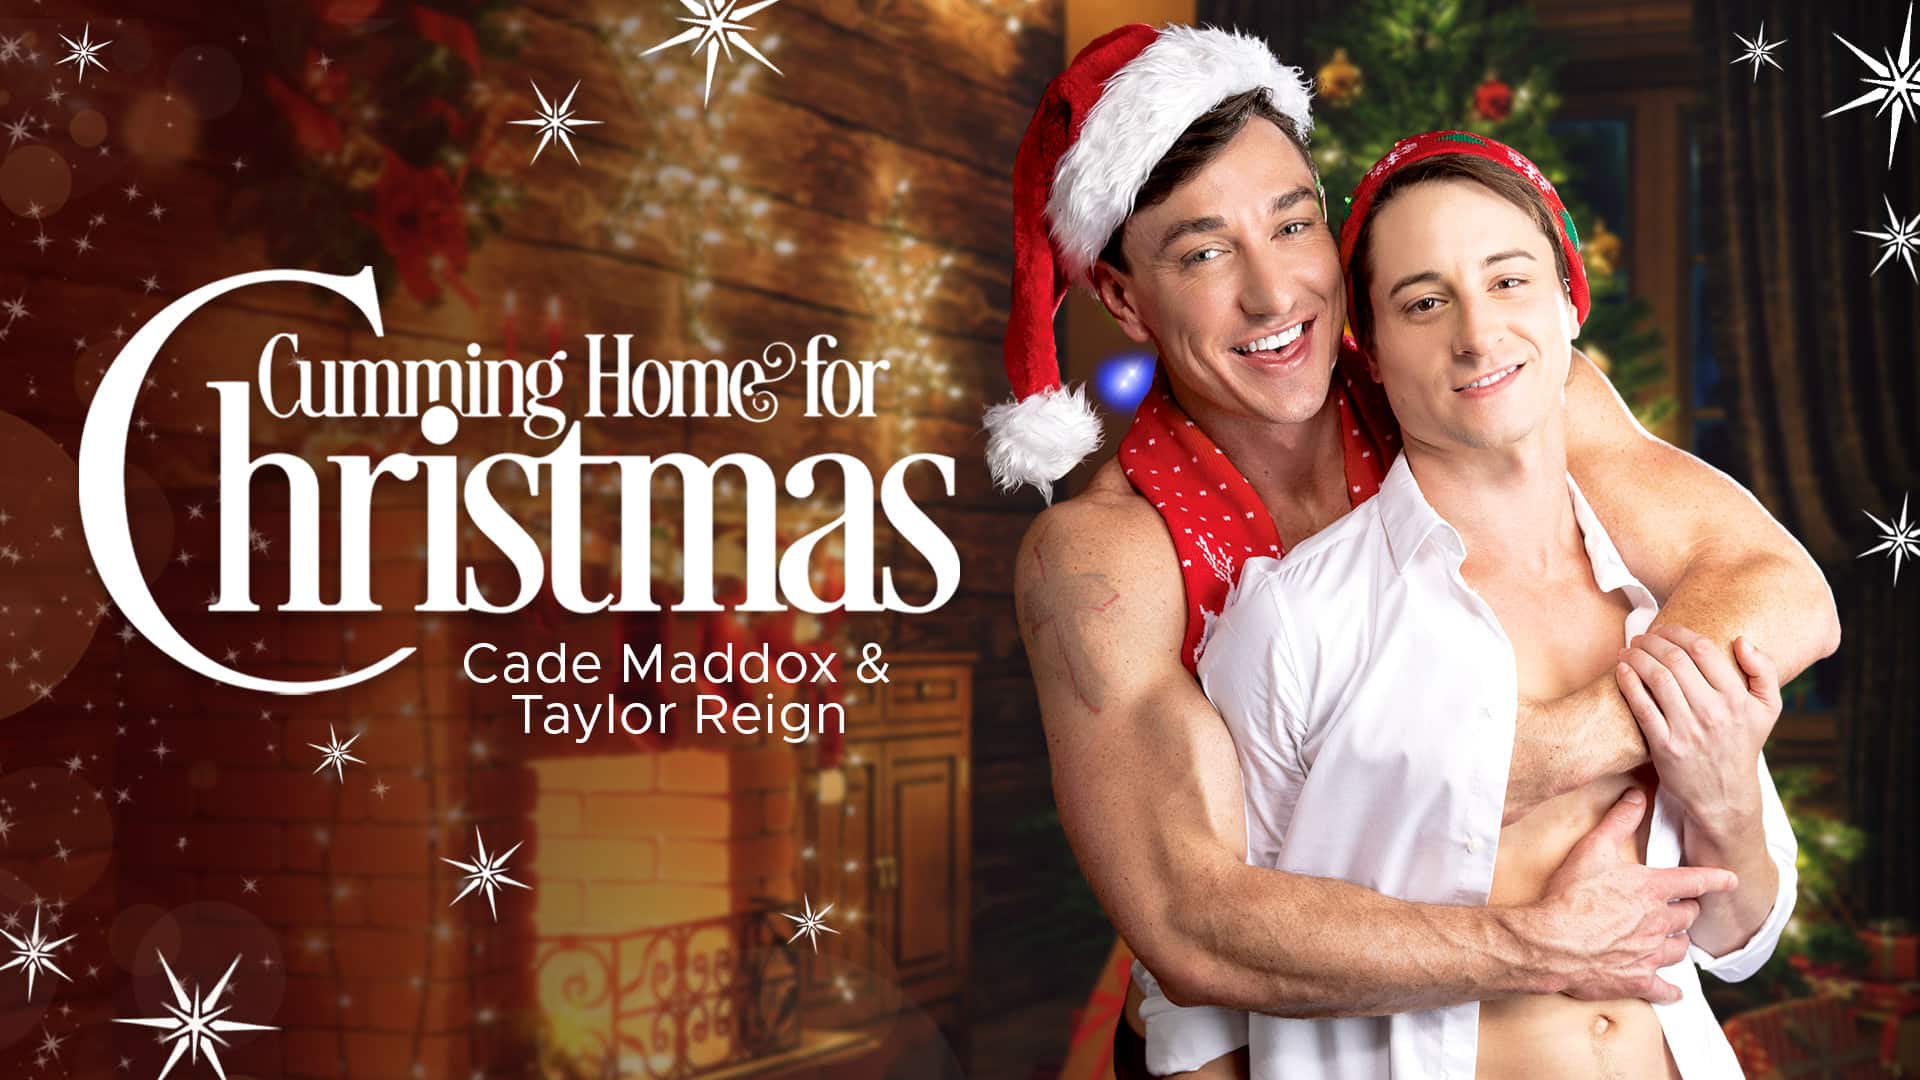 99359 03 01 - Cumming Home For Christmas - Cade Maddox and Taylor Reign